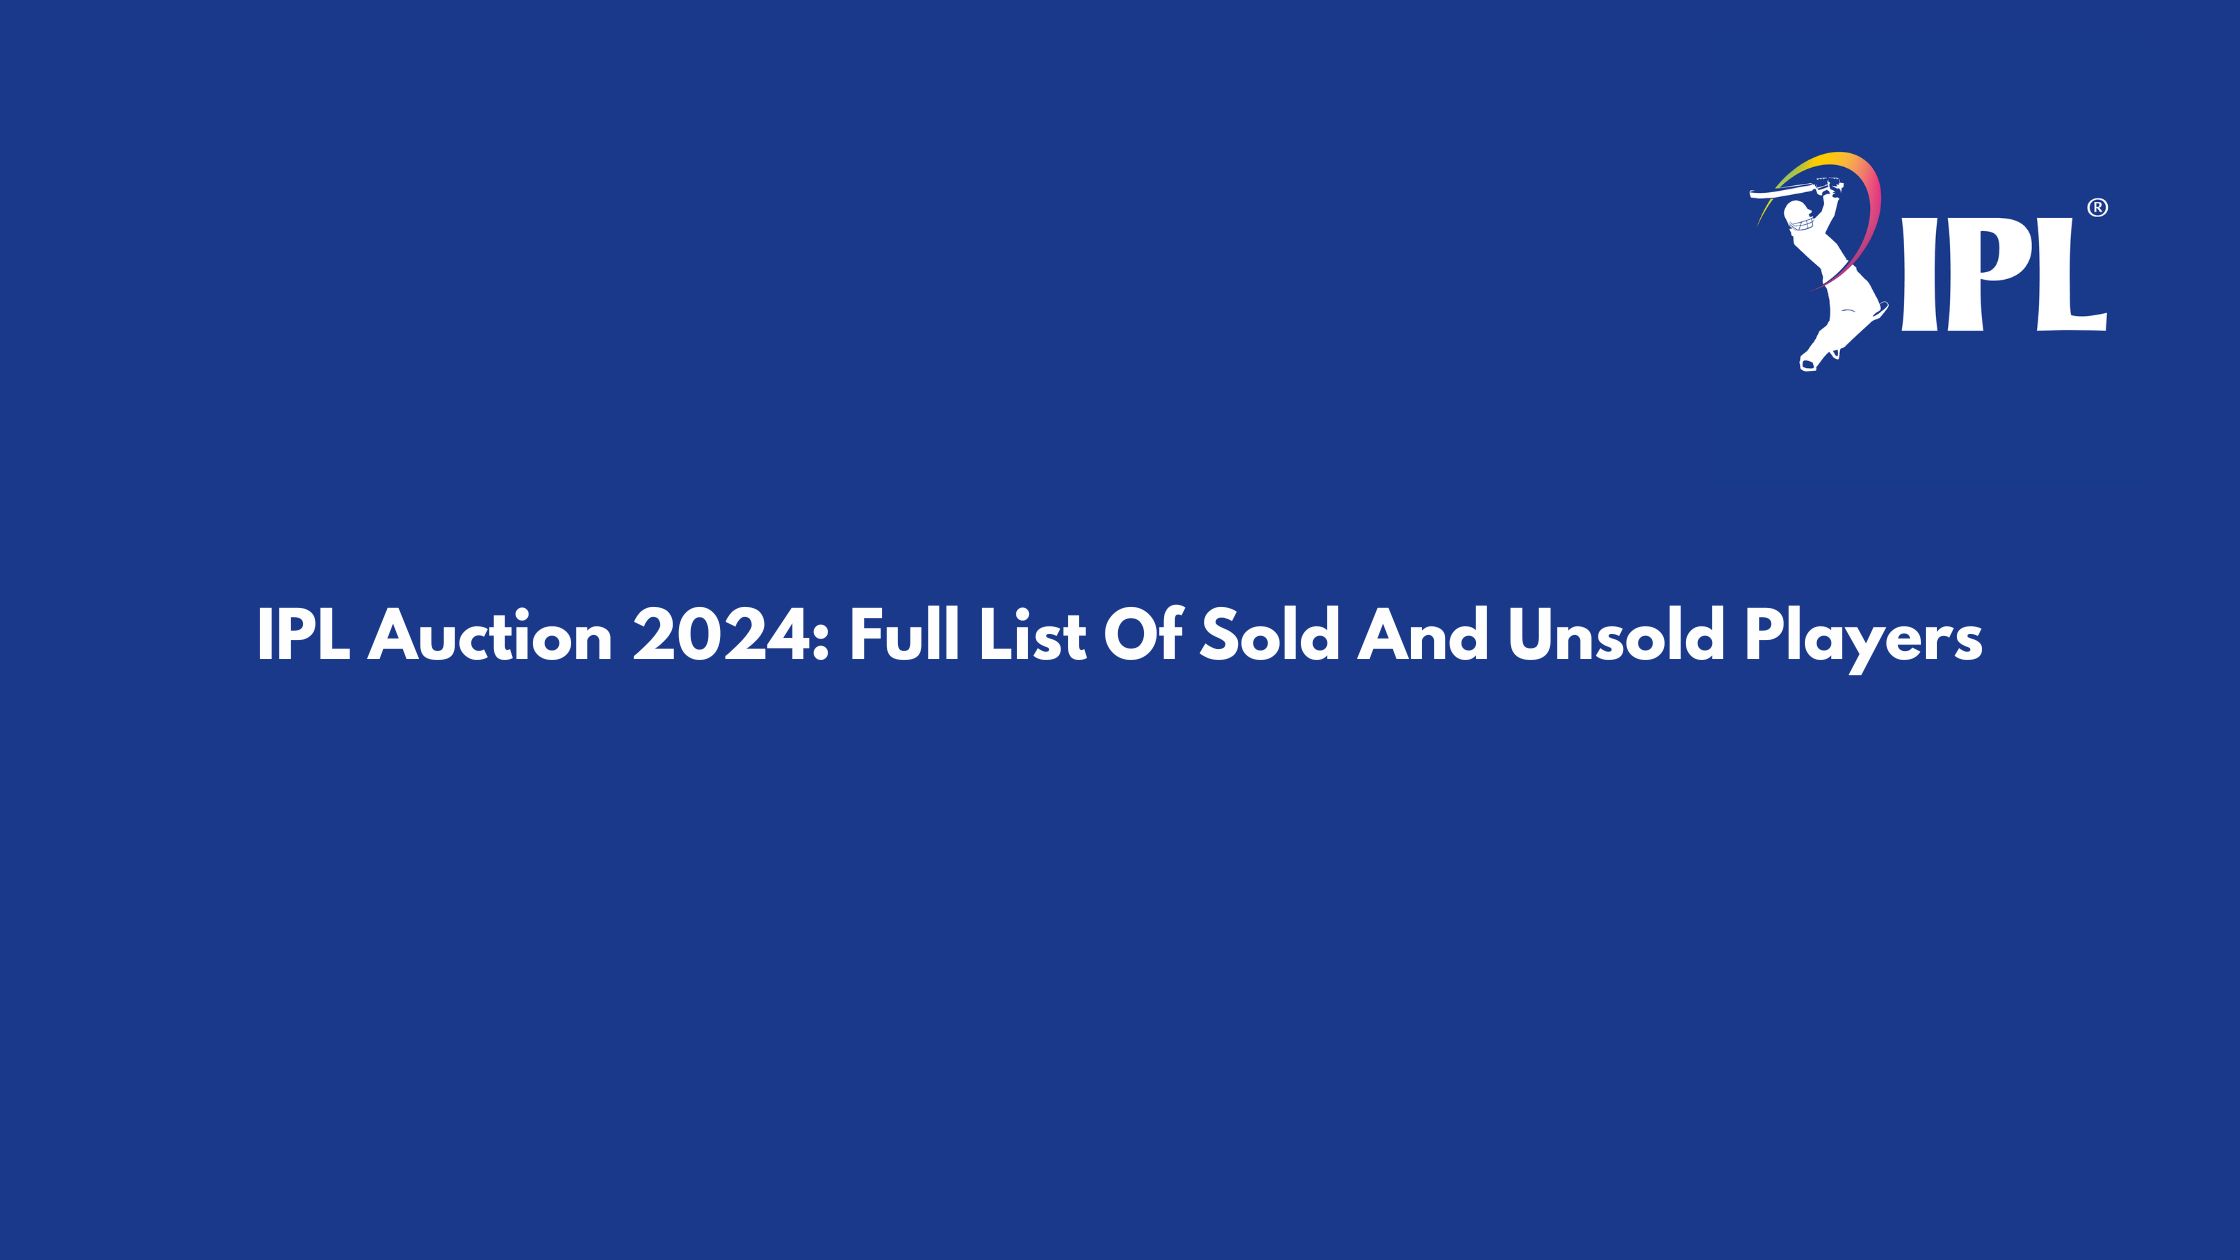 IPL Auction 2024: Full List Of Sold And Unsold Players